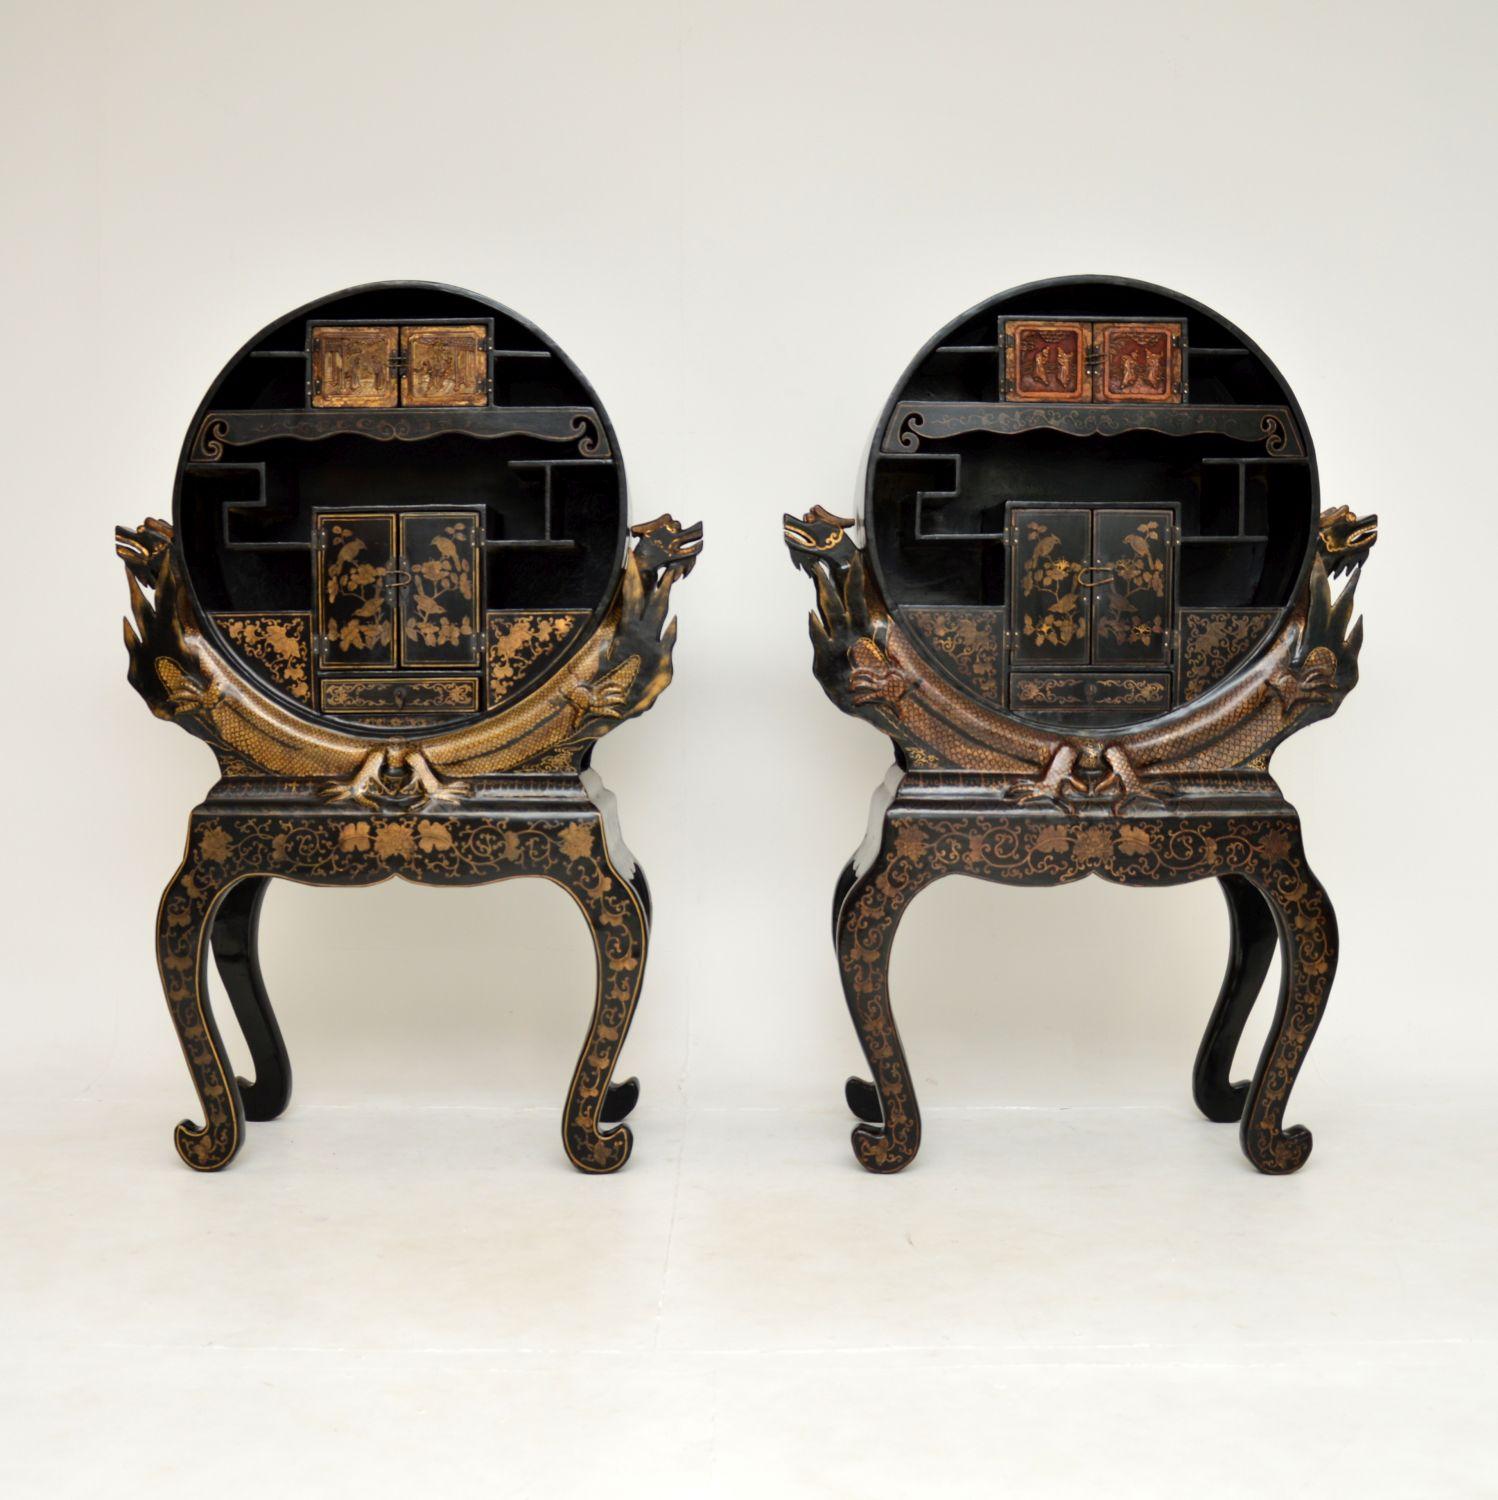 A magnificent pair of antique oriental lacquered chinoiserie cabinets. They were made in Japan, and date from around the 1890-1910 period.

The quality is outstanding, they are beautifully crafted with amazing details throughout. There is profuse